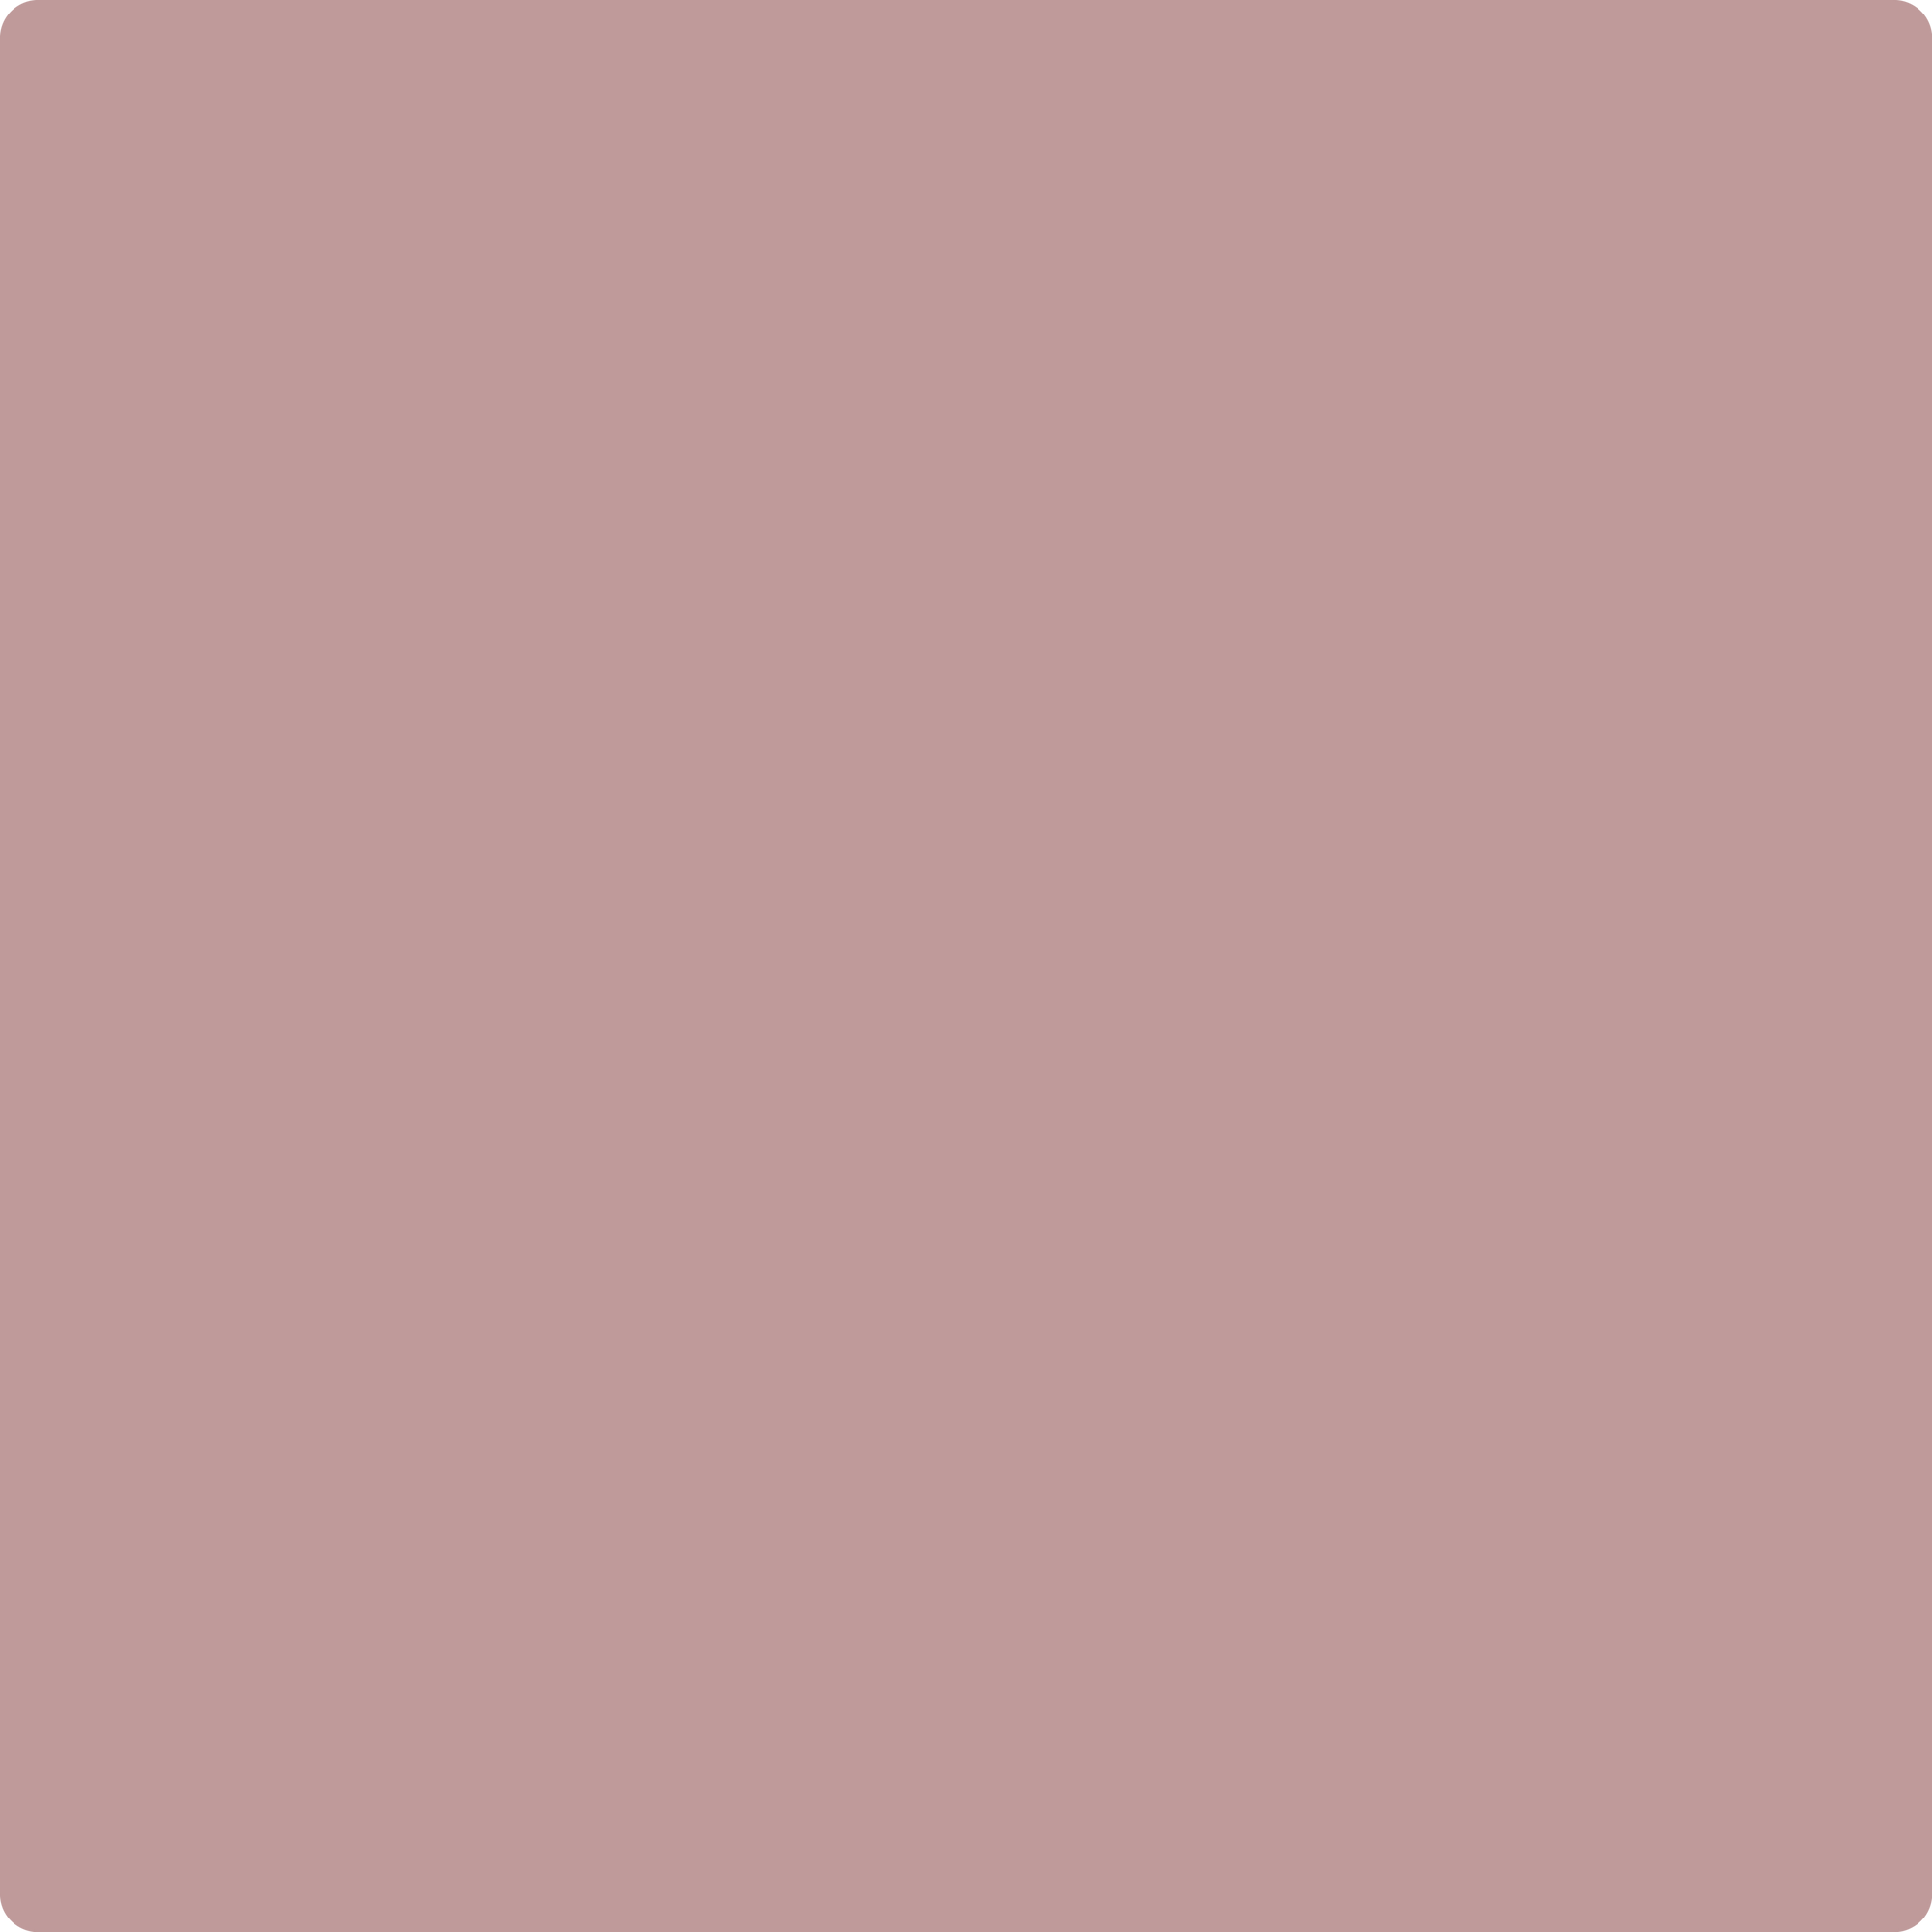 the-color-mauve-in-paint-free-download-goodimg-co